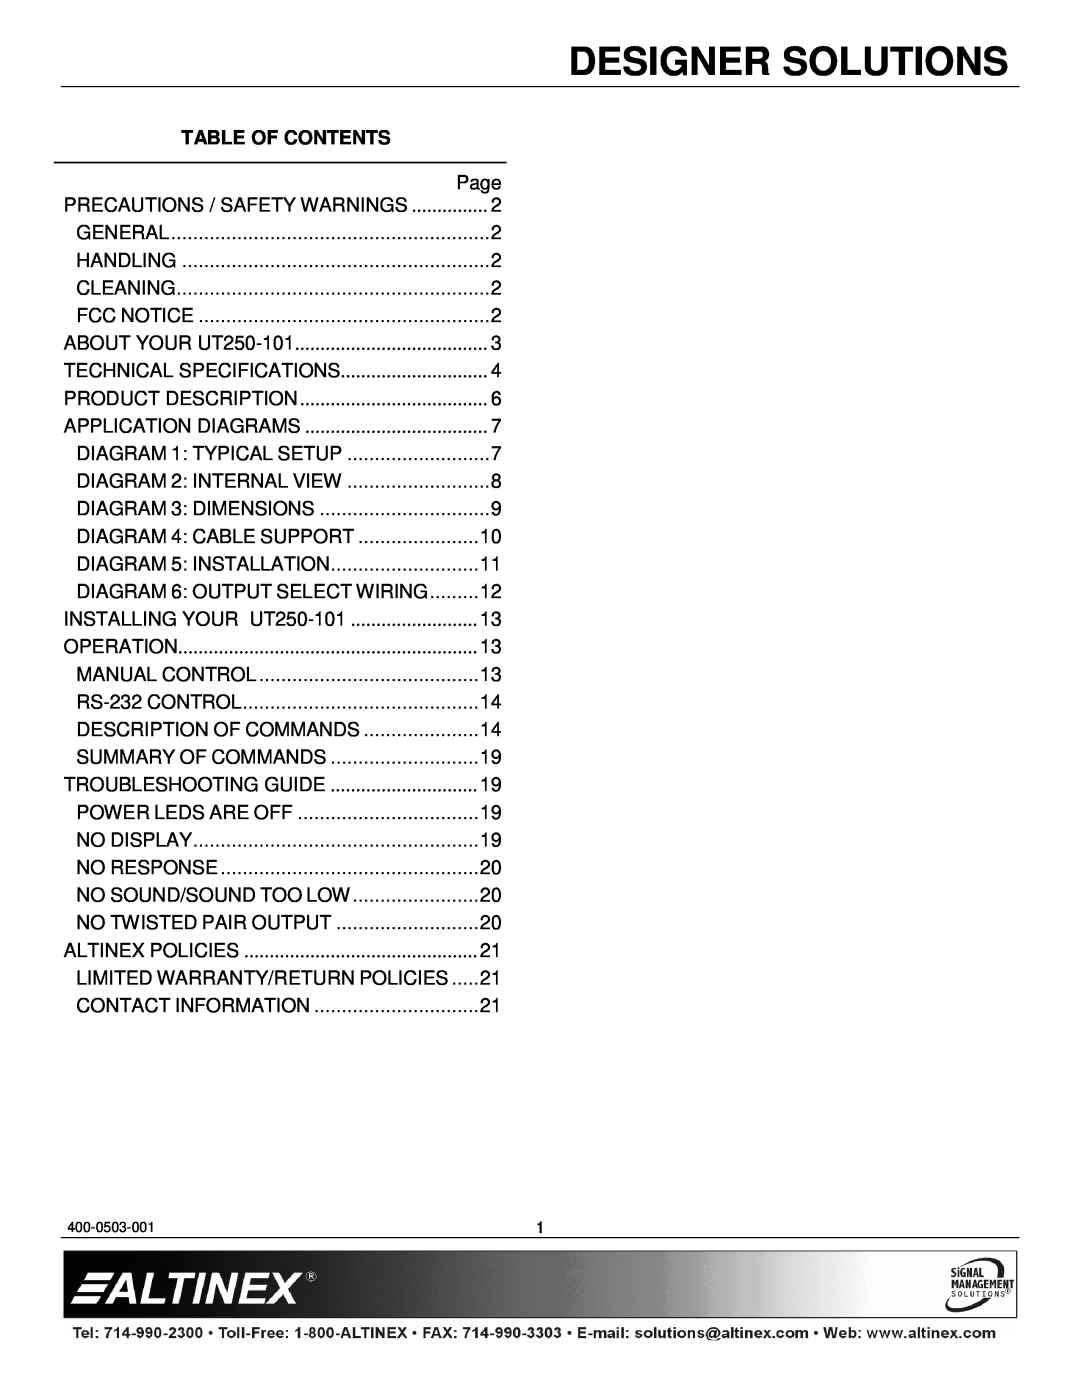 Altinex UT250-101 manual Table Of Contents, Designer Solutions, Page 